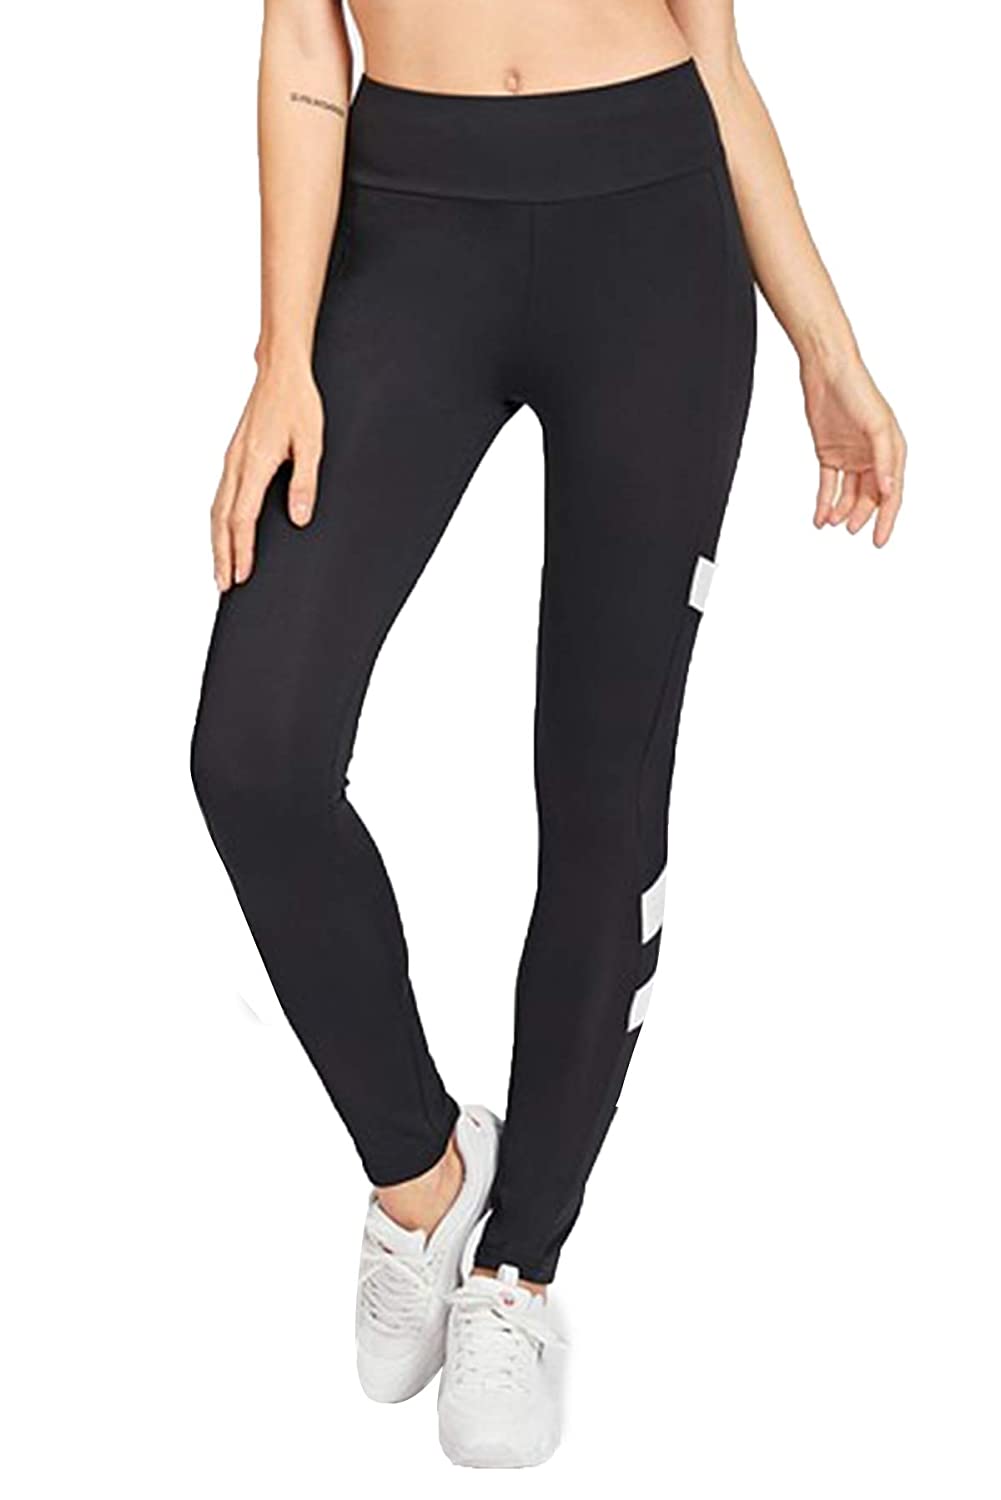 Best Gym Pants For Ladies For An Easy Exercise Session